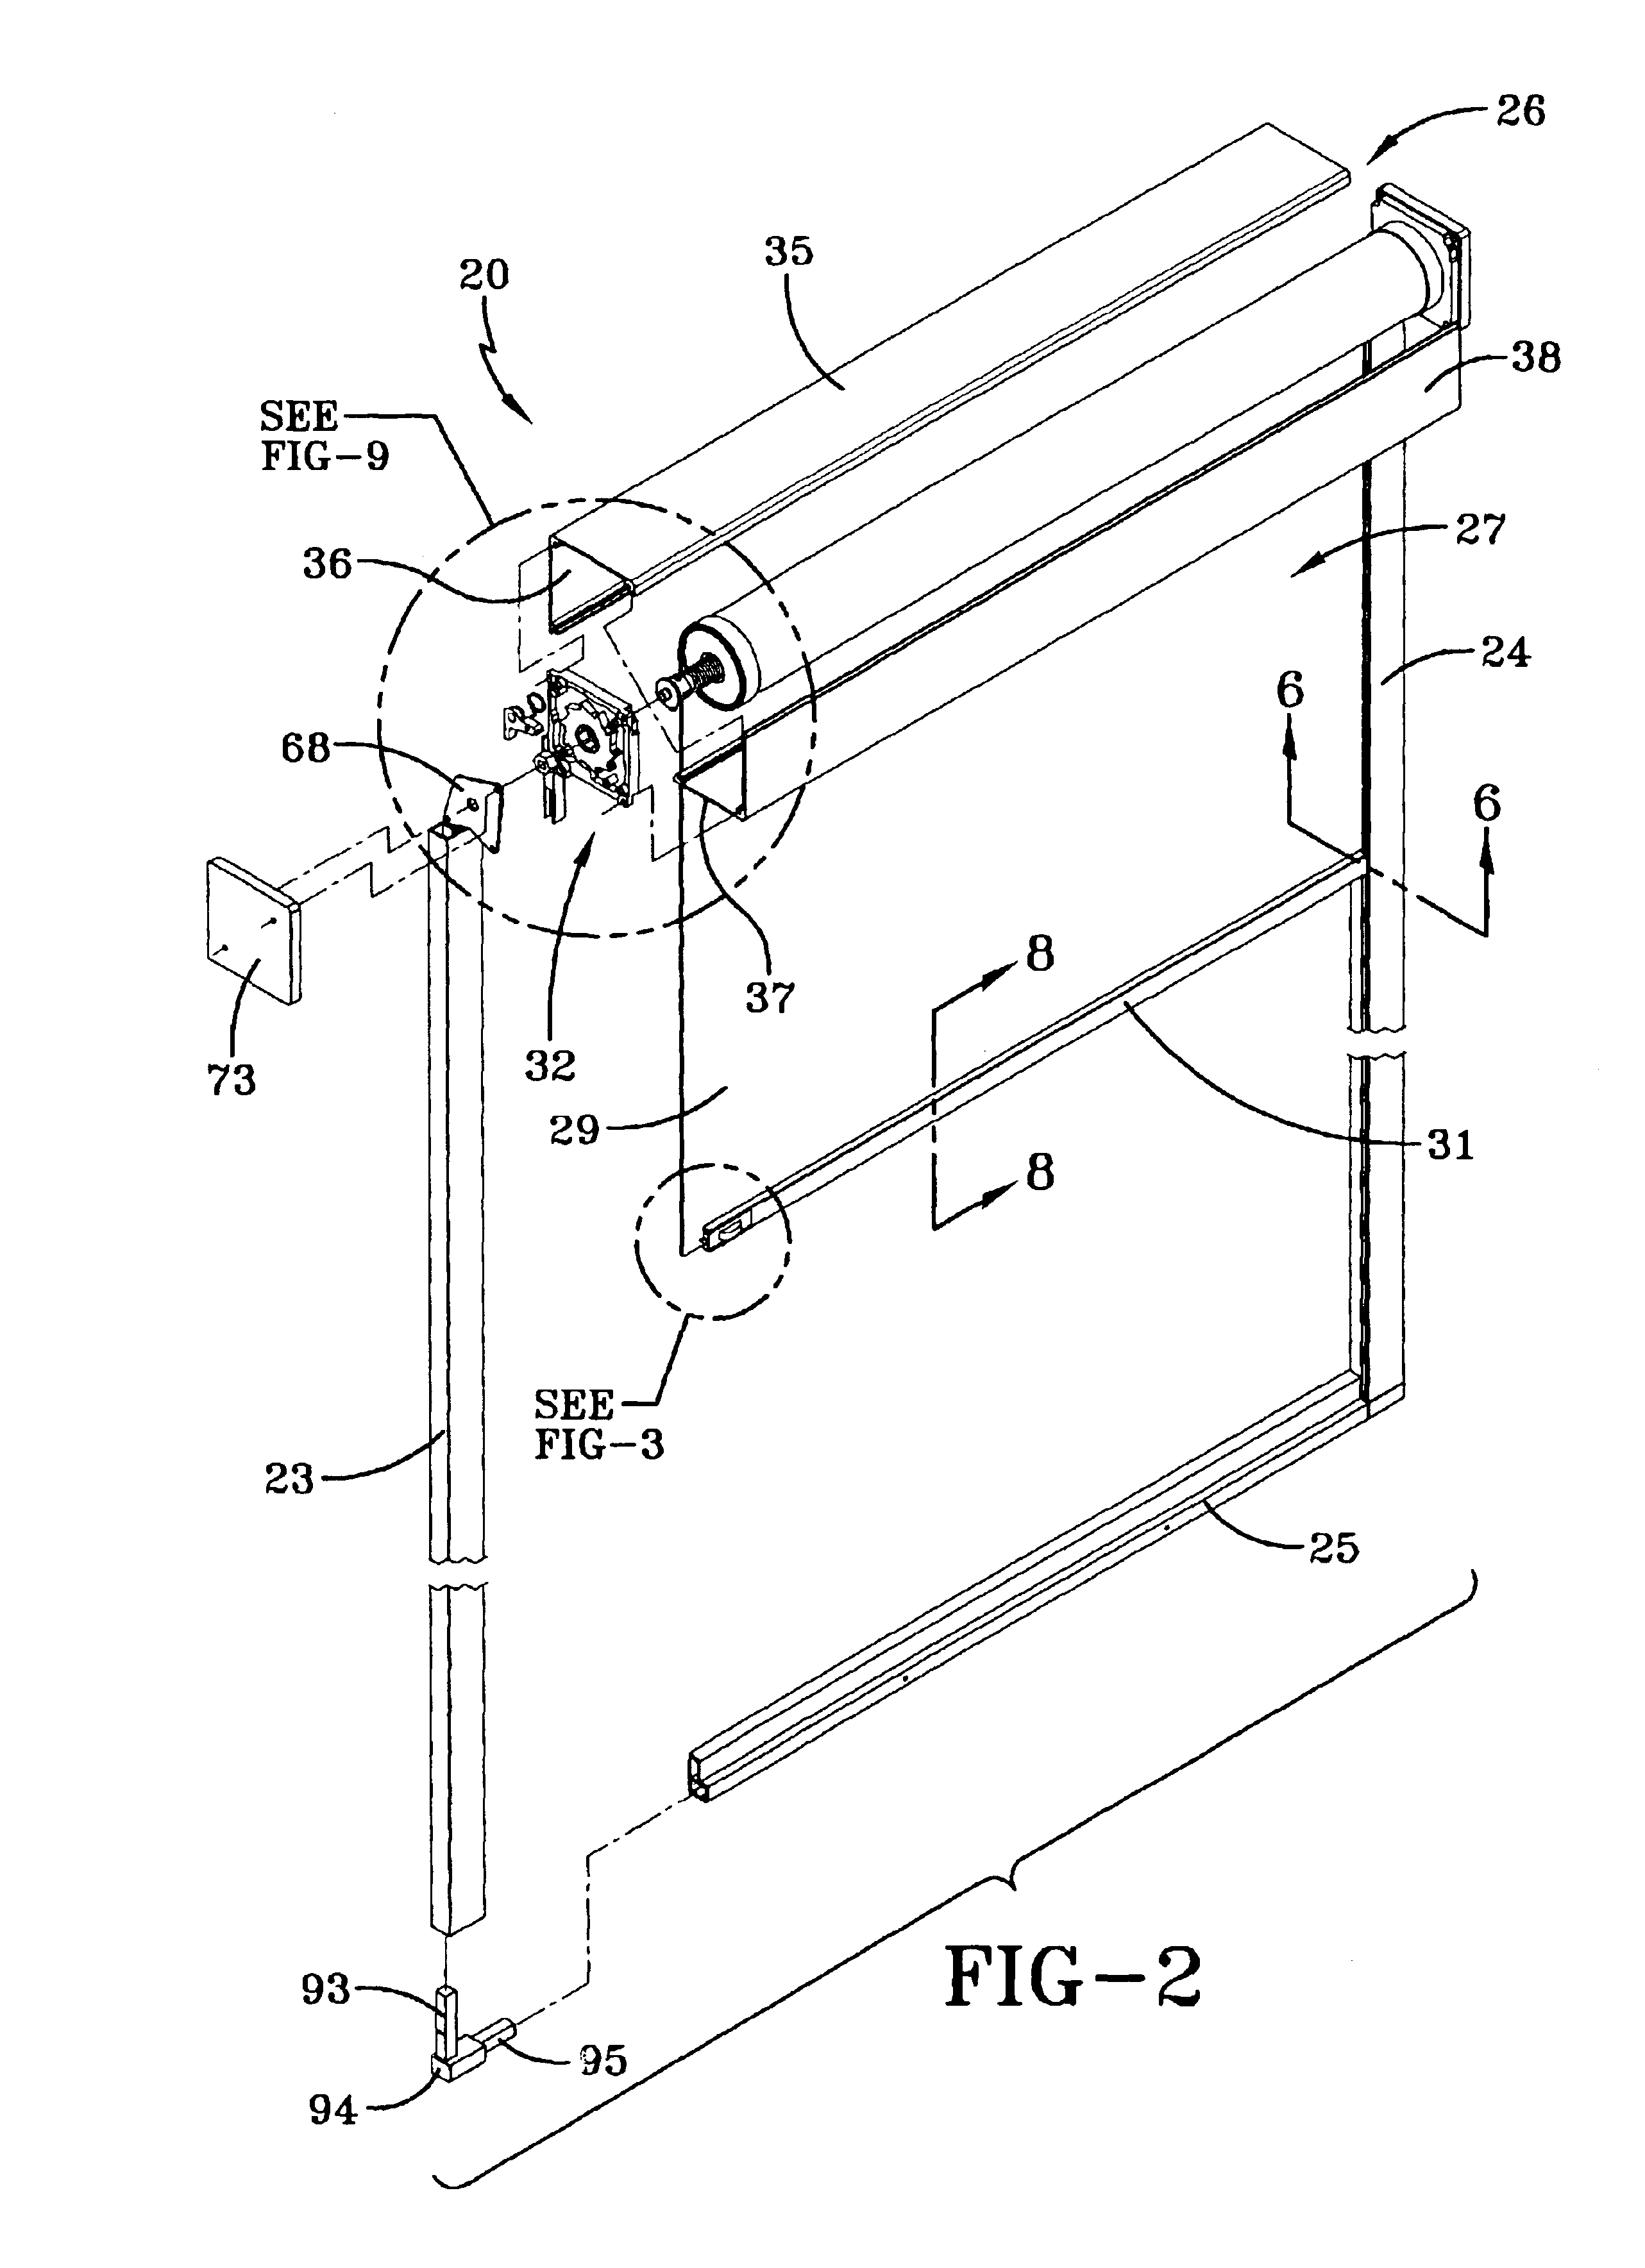 Apparatus for covering an opening in a building